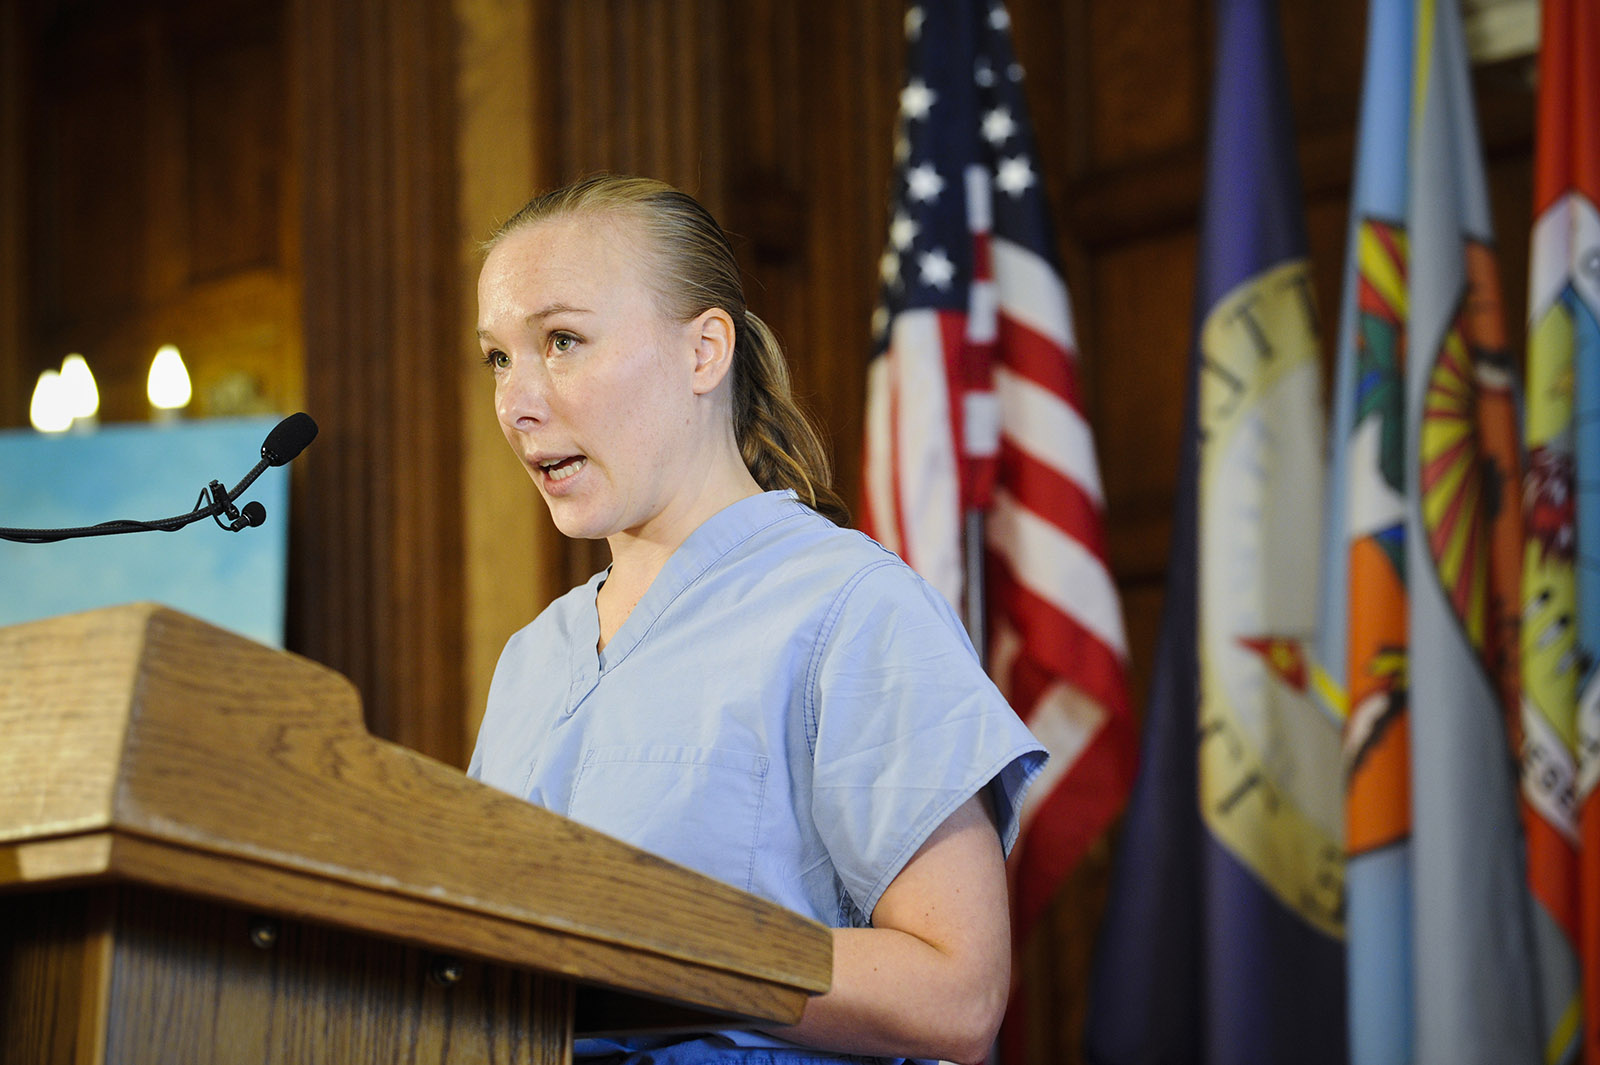 Charlotte Skinner, an Emergency Room nurse at St. Peter's Health, speaks at a Covid-19 press call hosted by Gov. Steve Bullock at the State Capitol, Tuesday, Oct. 20.